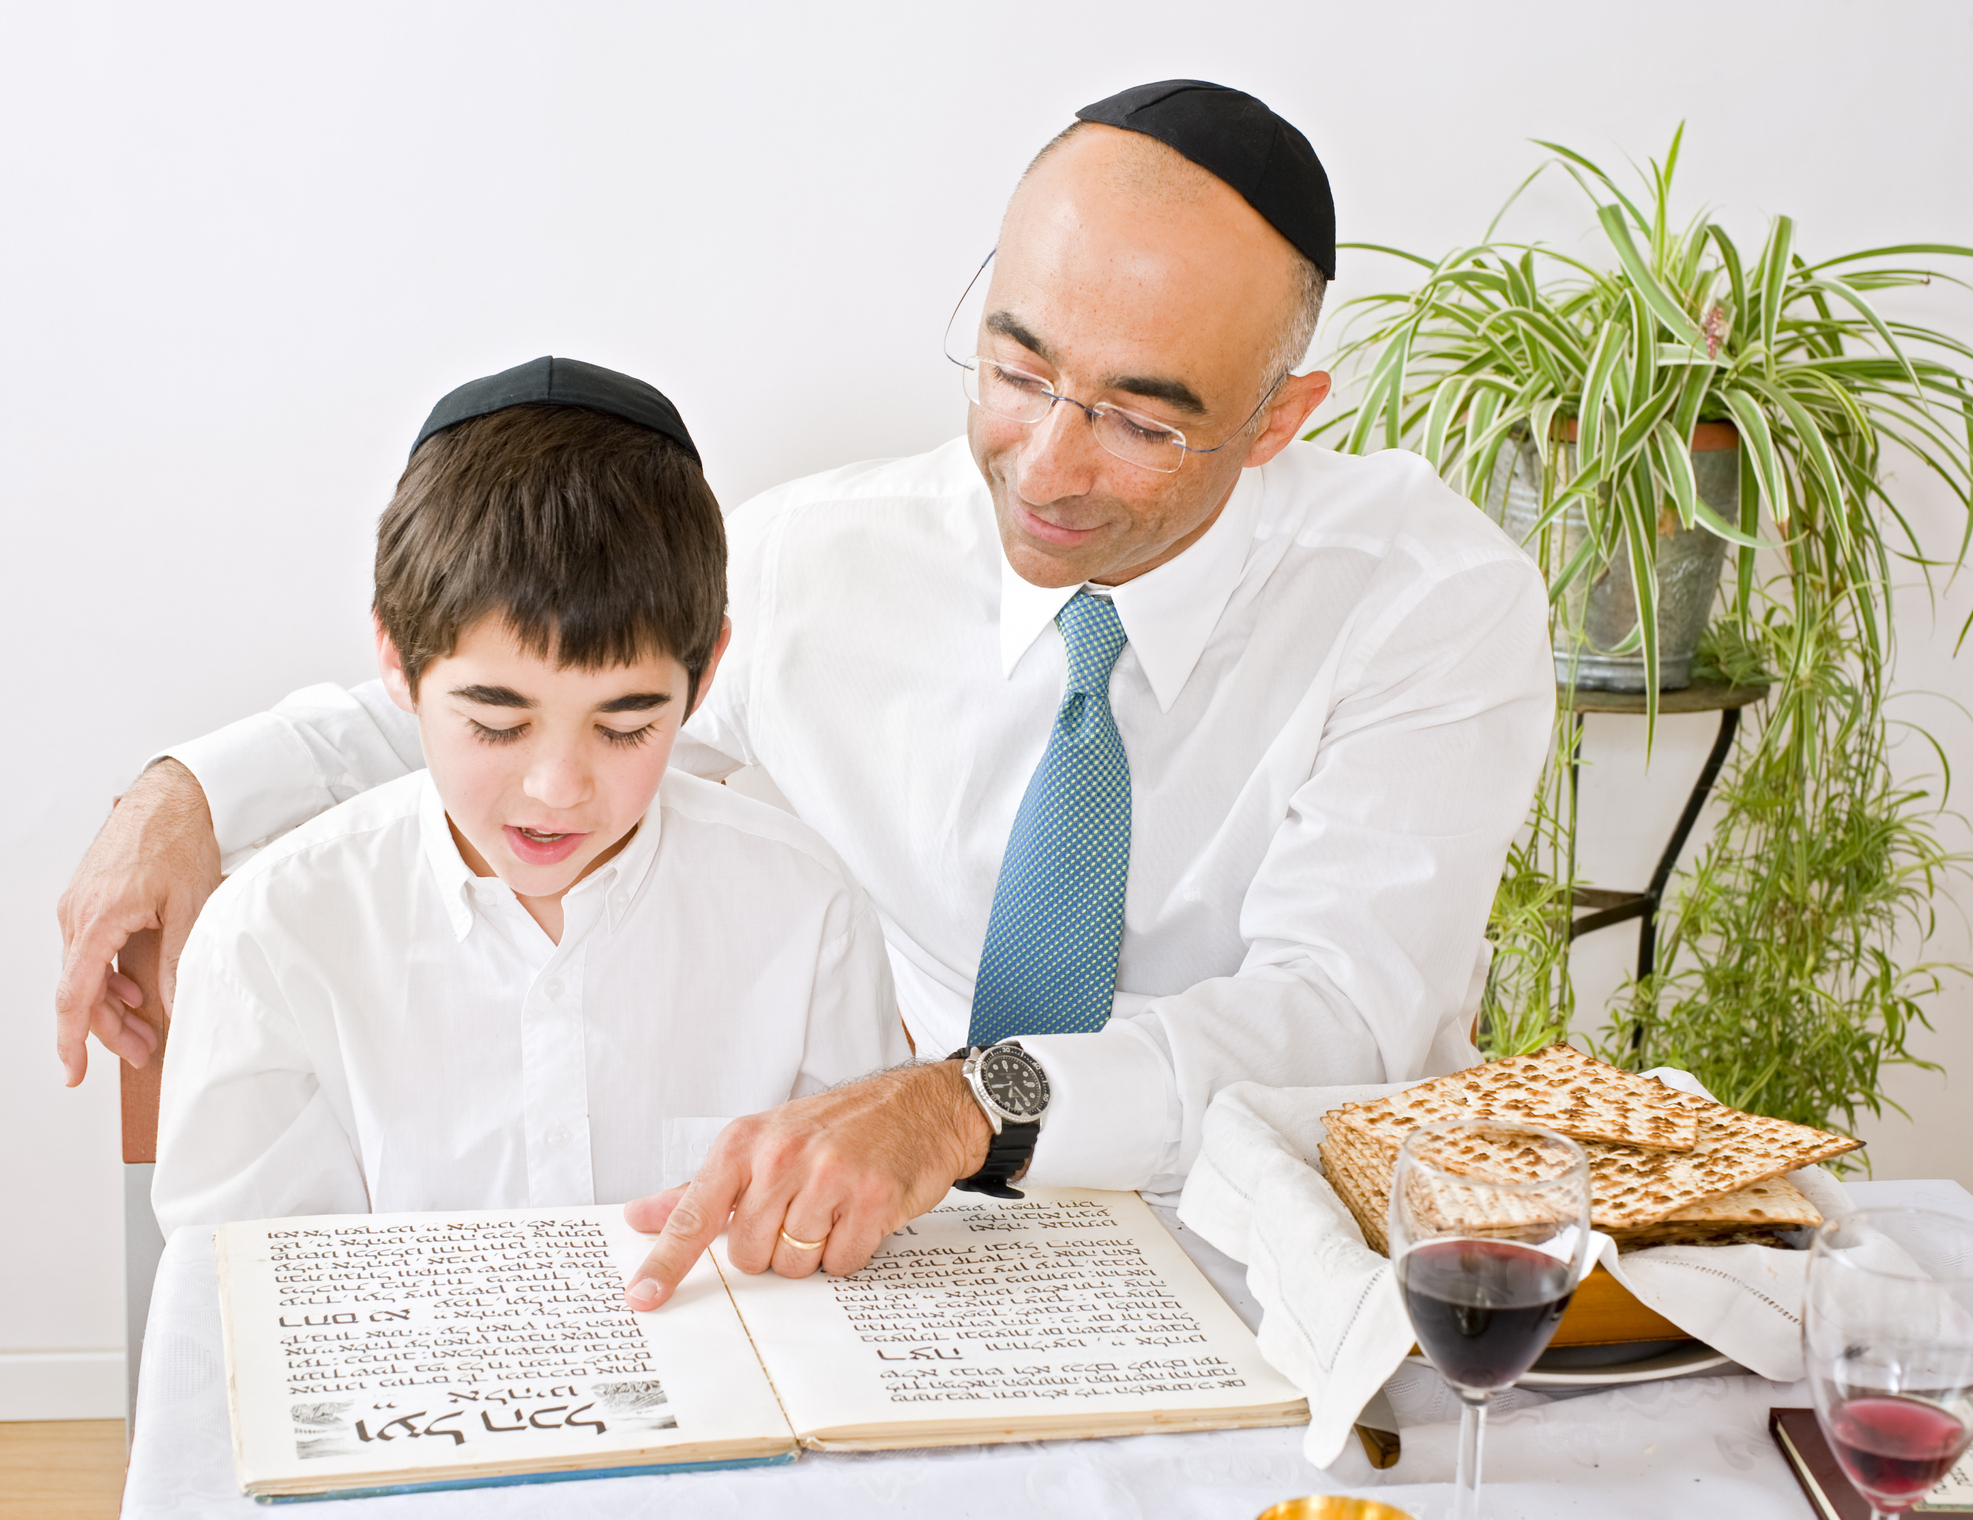 Reading the haggadah together is one of several Passover customs. Photo by pushlama via iStock.